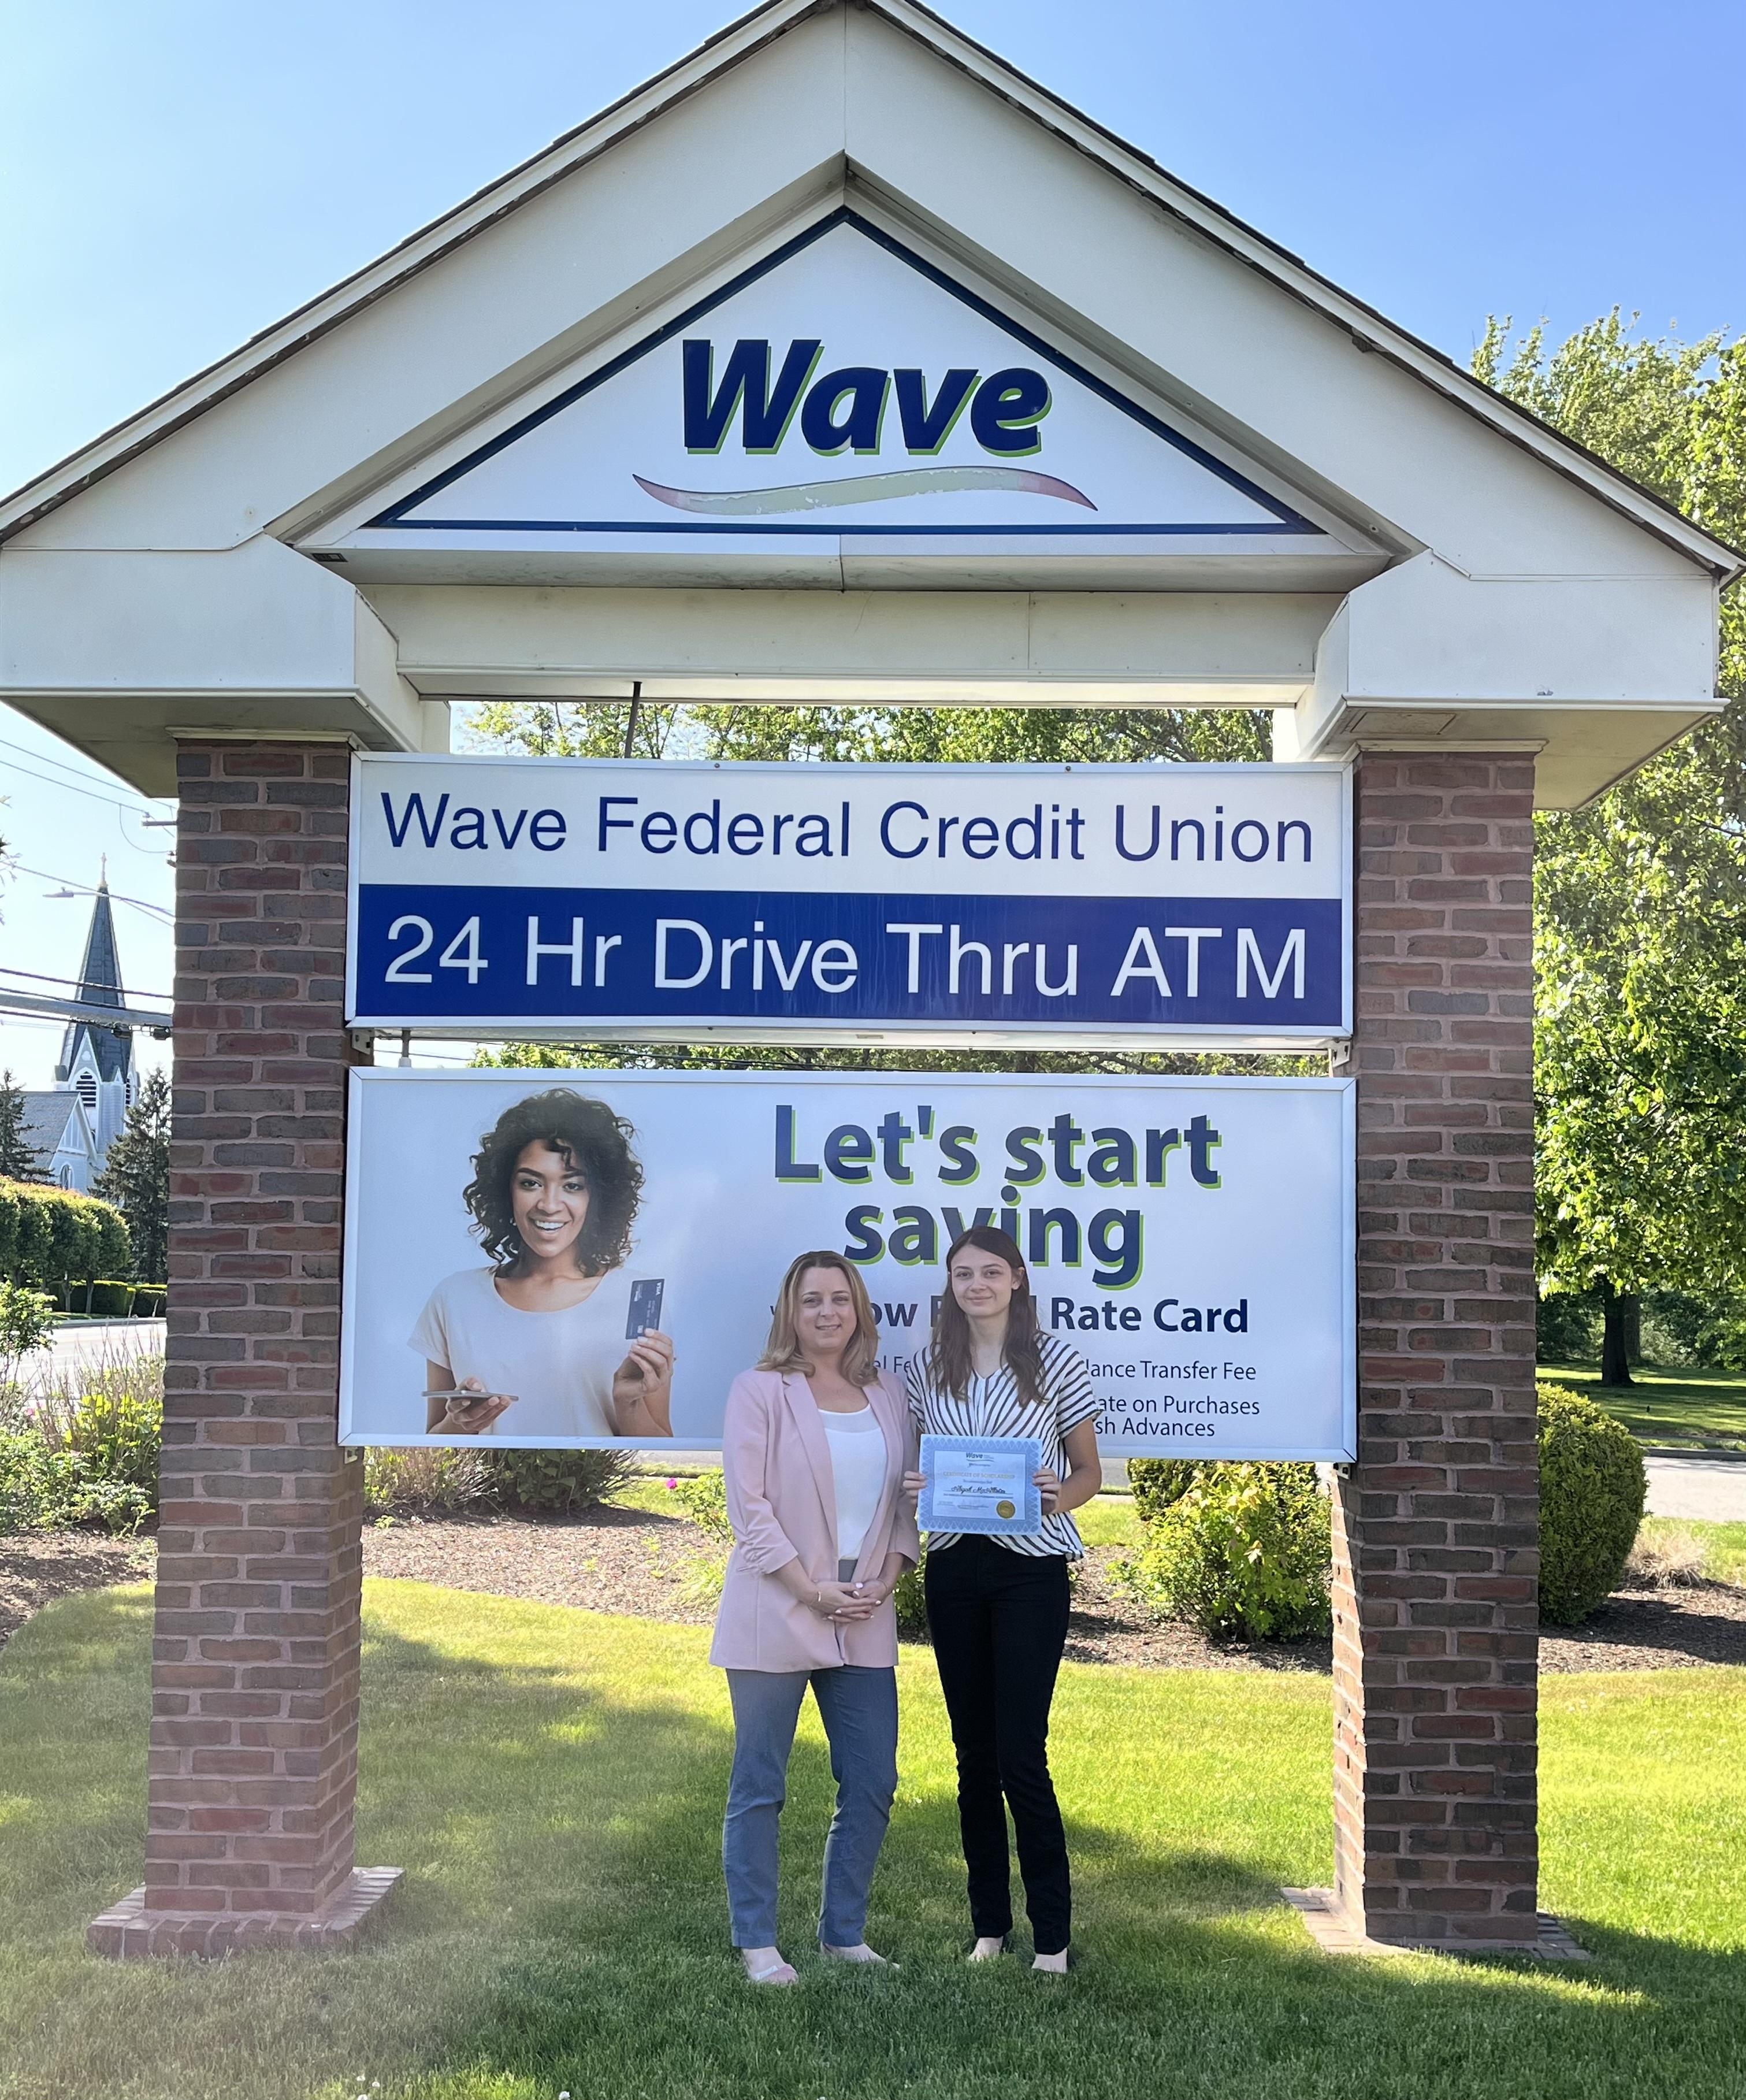 Pictured with Elizabeth Zachow, Wave’s Vice President of Lending, is Abigail.